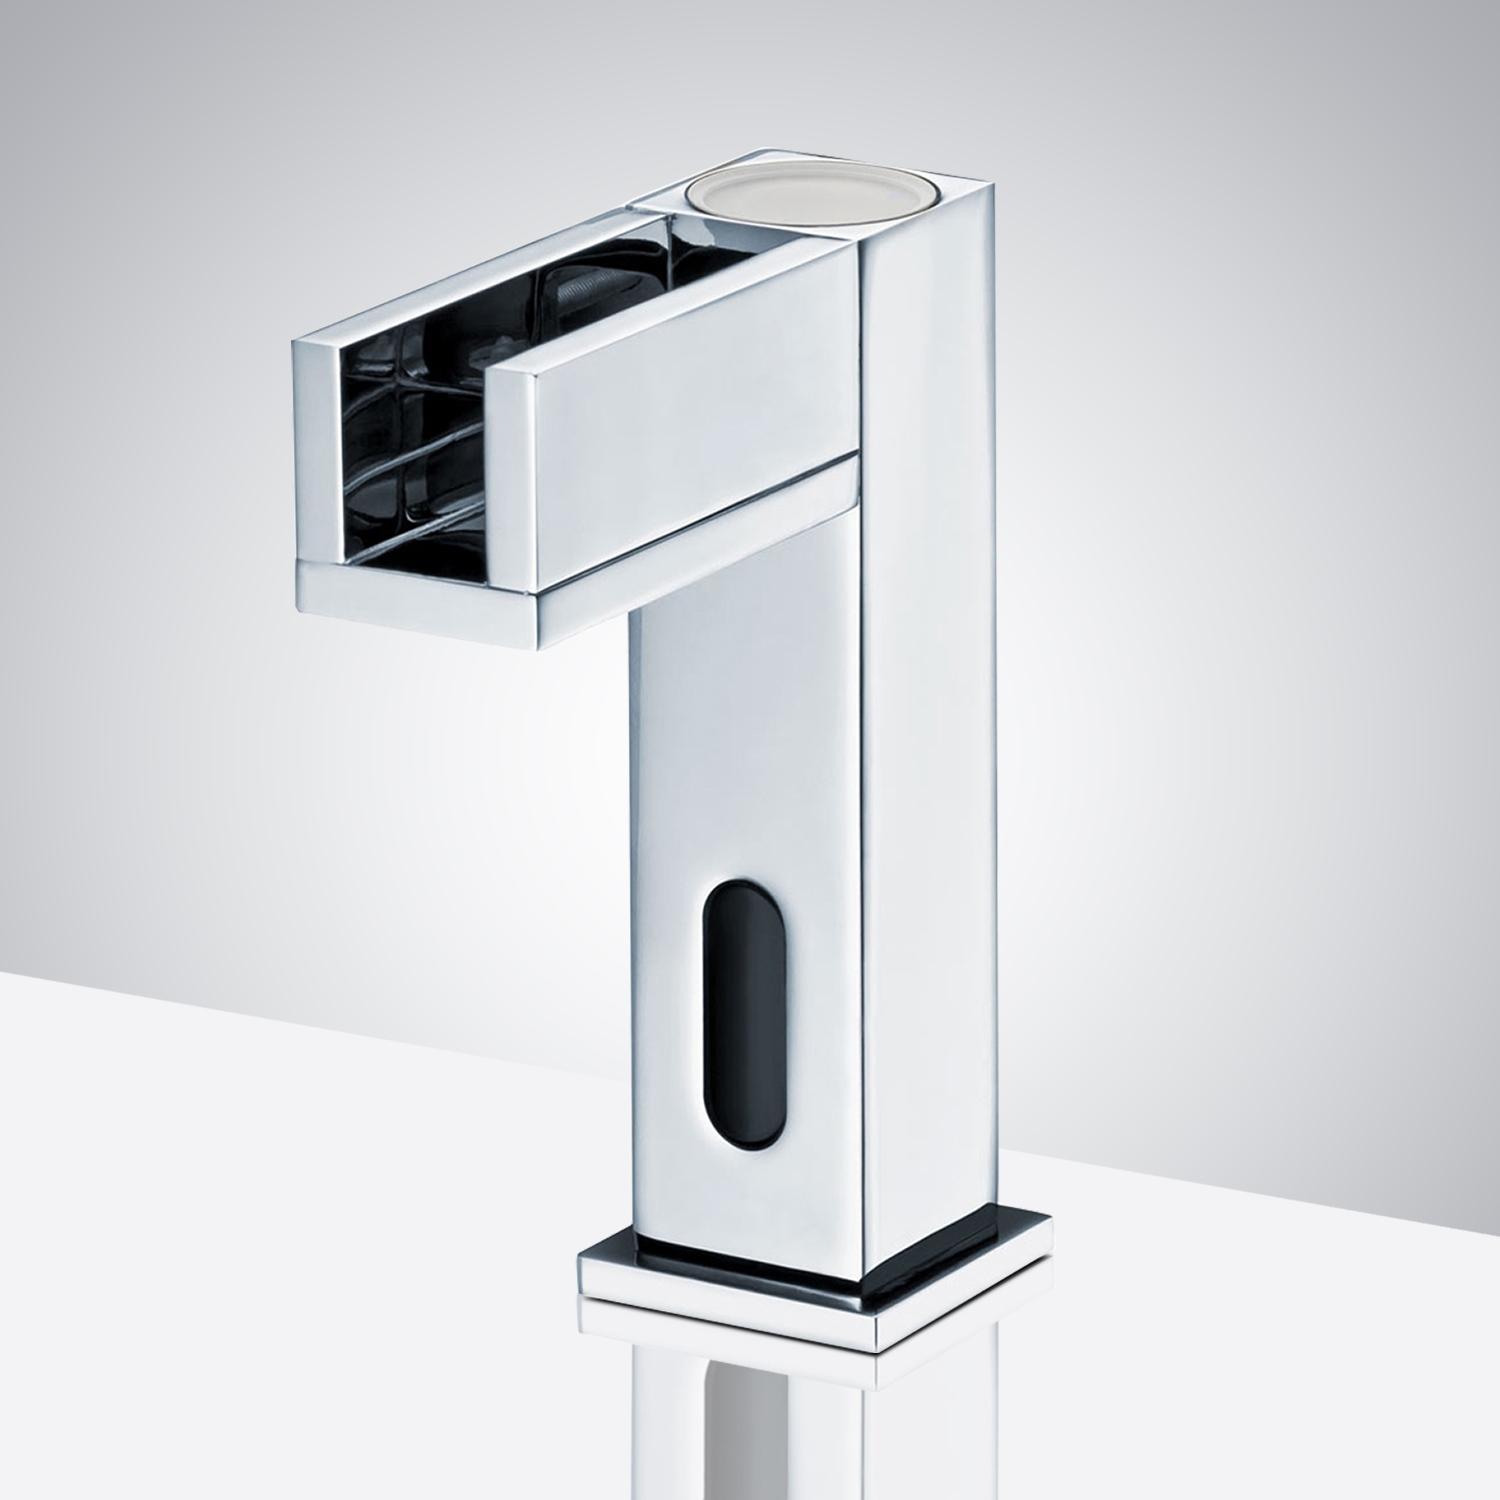 Fontana-Contemporary-Commercial-Automatic-Waterfal